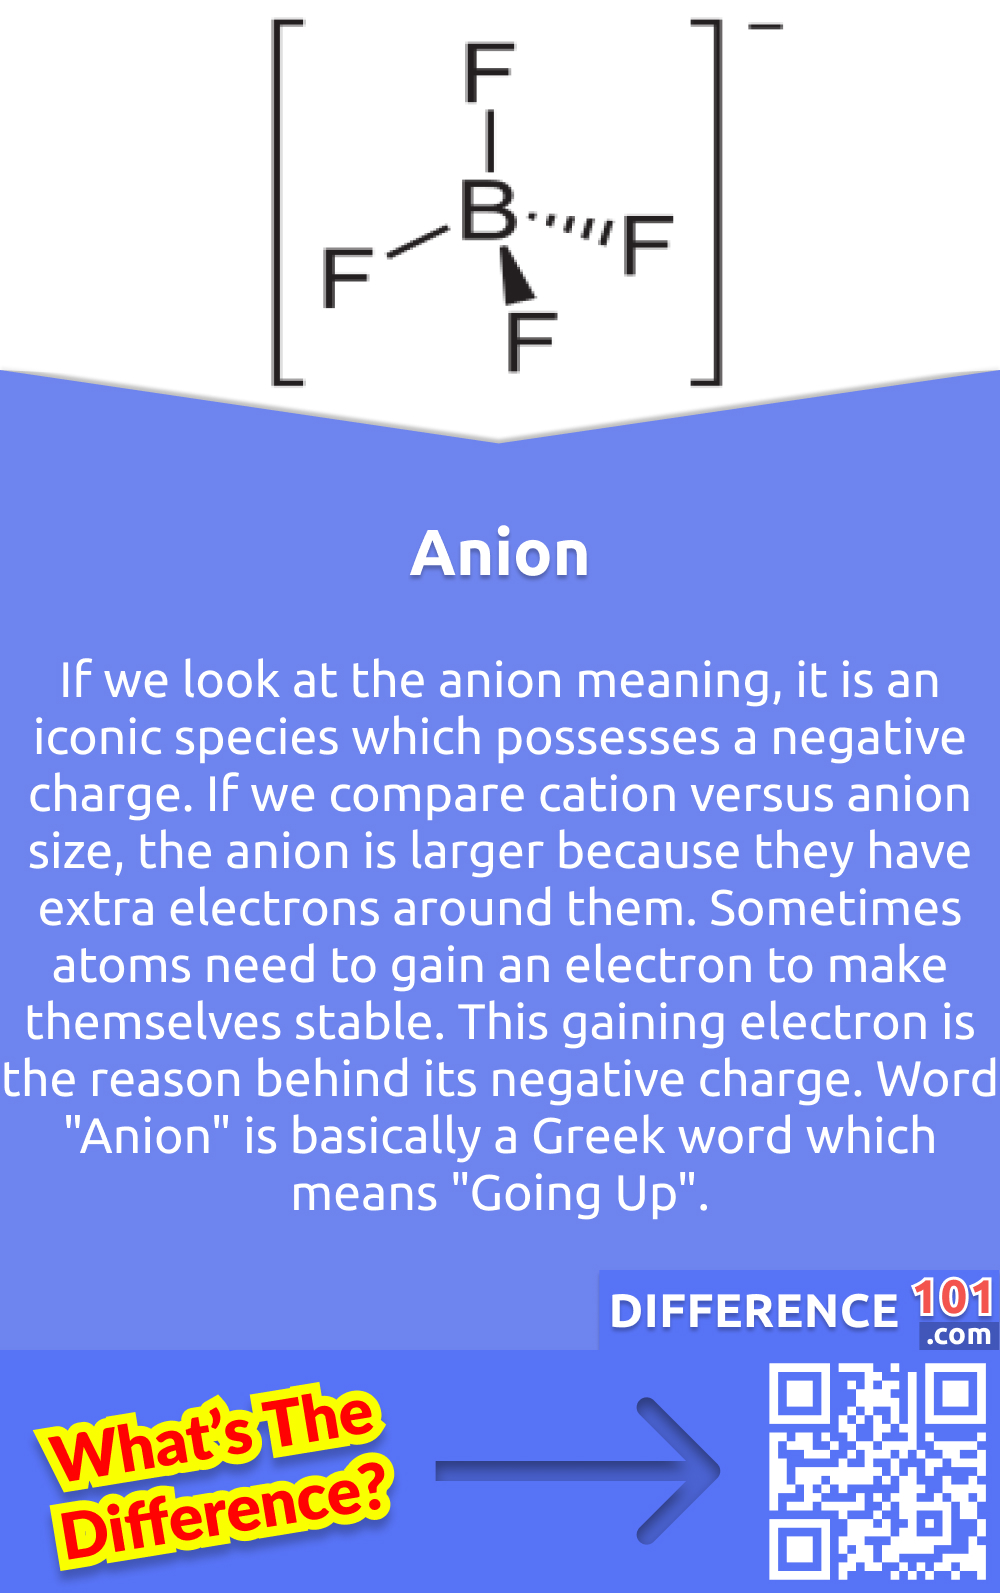 What Is an Anion? If we look at the anion meaning, it is an iconic species which possesses a negative charge. If we compare cation versus anion size, the anion is larger because they have extra electrons around them. Sometimes atoms need to gain an electron to make themselves stable. This gaining electron is the reason behind its negative charge. Word "Anion" is basically a Greek word which means "Going Up". This term was also developed by Faraday and then protons. This is because the atom gains electrons from another atom to get stable. Anions are present in nature in many different ways. Most negative ions are naturally found in places like mountains, beaches, and near waterfalls. Because the evaporation of water can produce negative ions leaving behind a positive charge in water. These naturally occurring anions are also known as "Longevity elements", as these are able to absorb micro particles in the air and remove bacteria and dust.